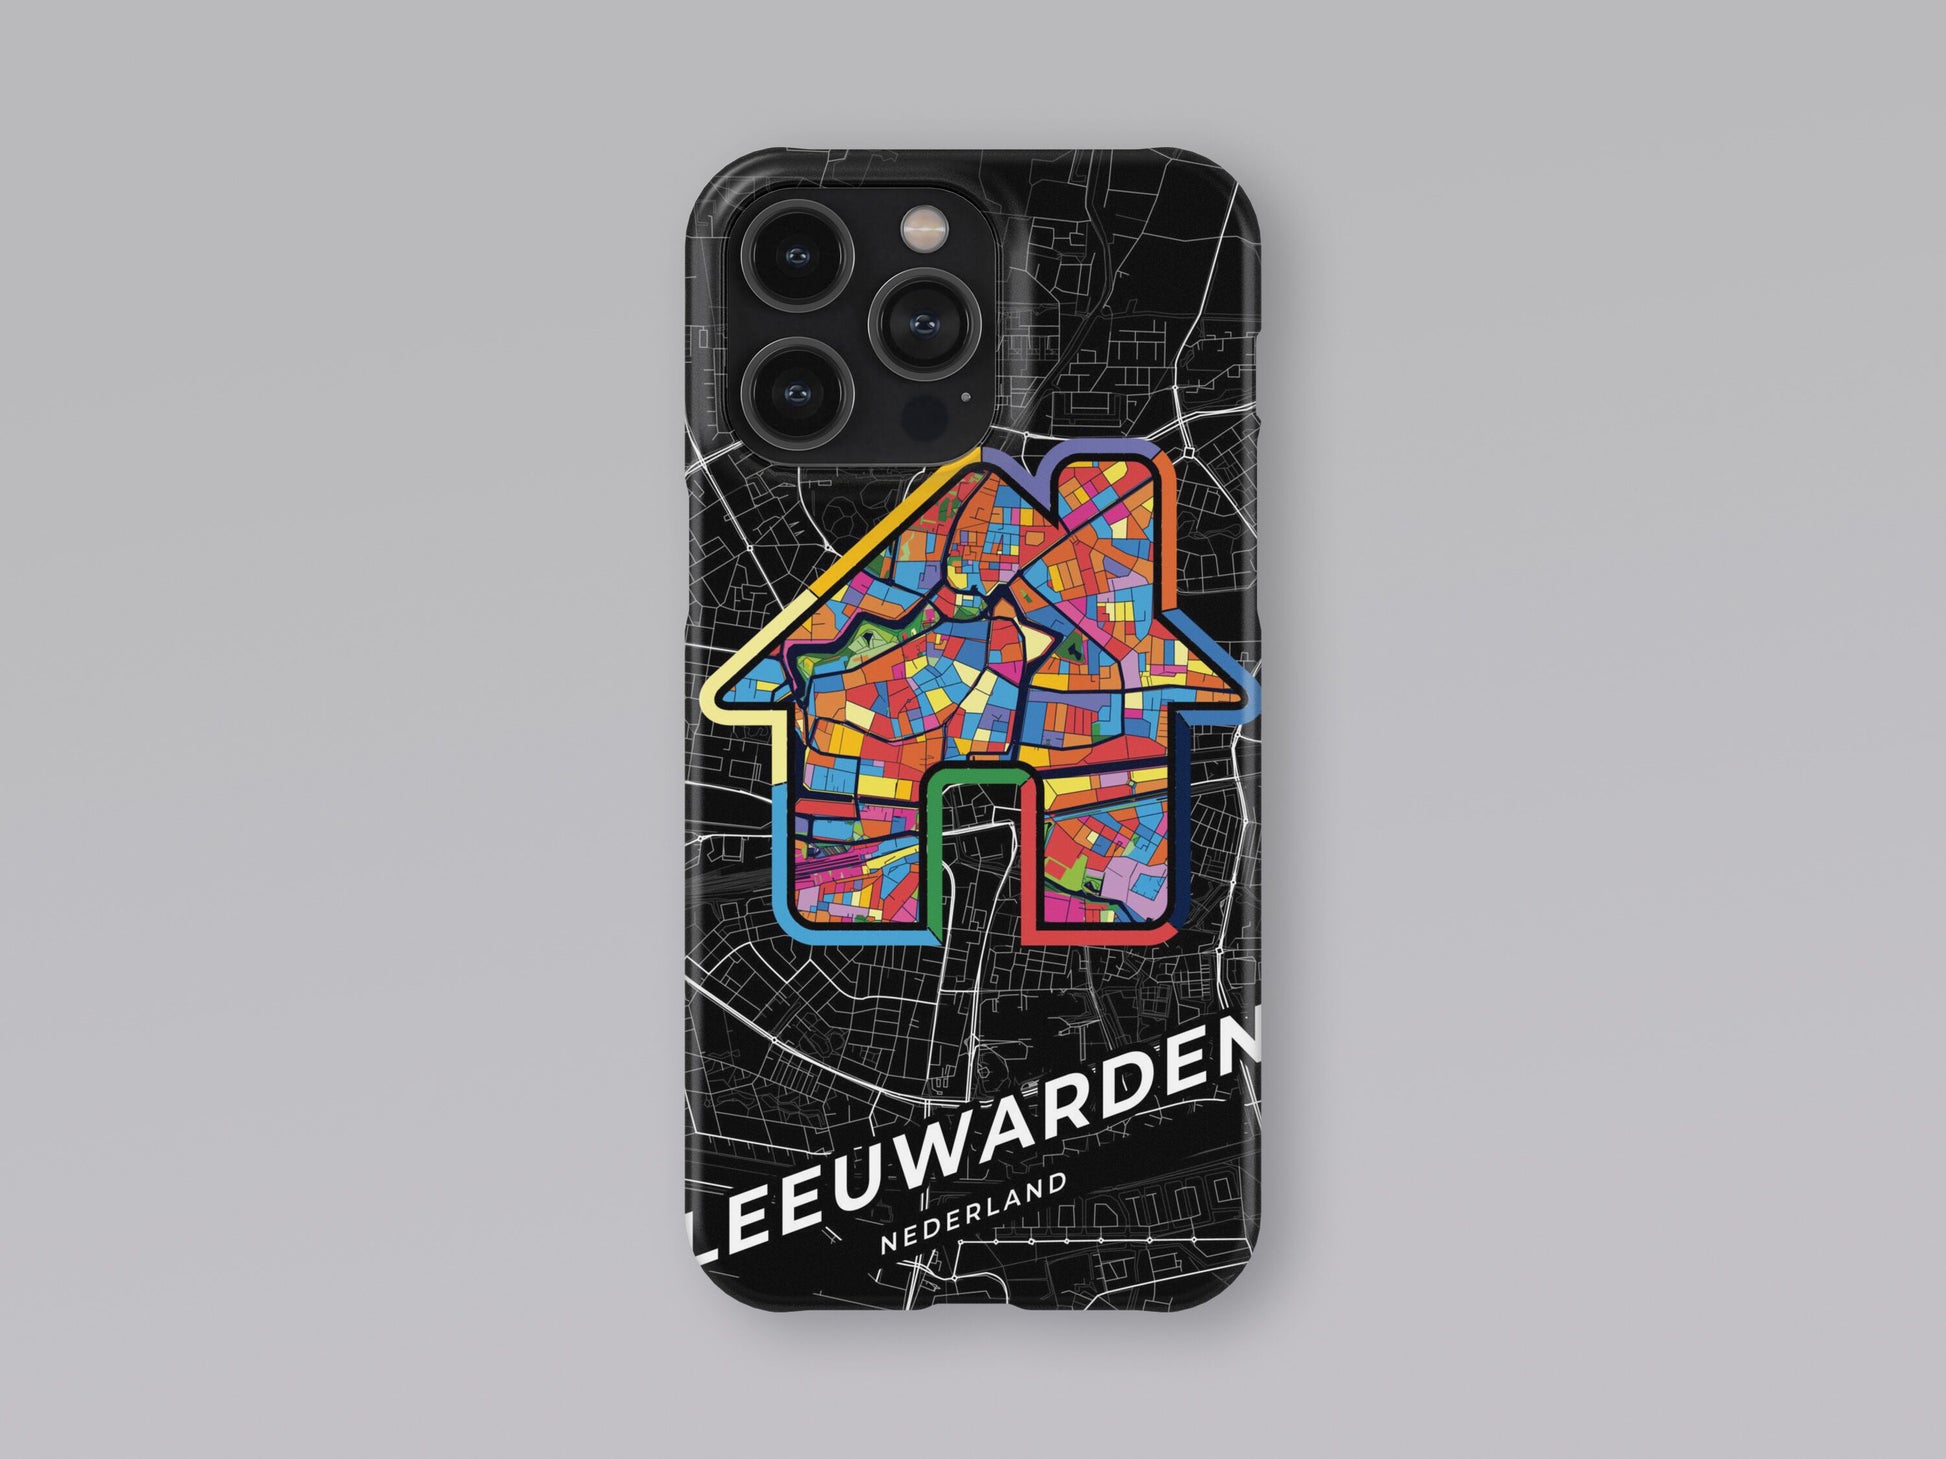 Leeuwarden Netherlands slim phone case with colorful icon. Birthday, wedding or housewarming gift. Couple match cases. 3